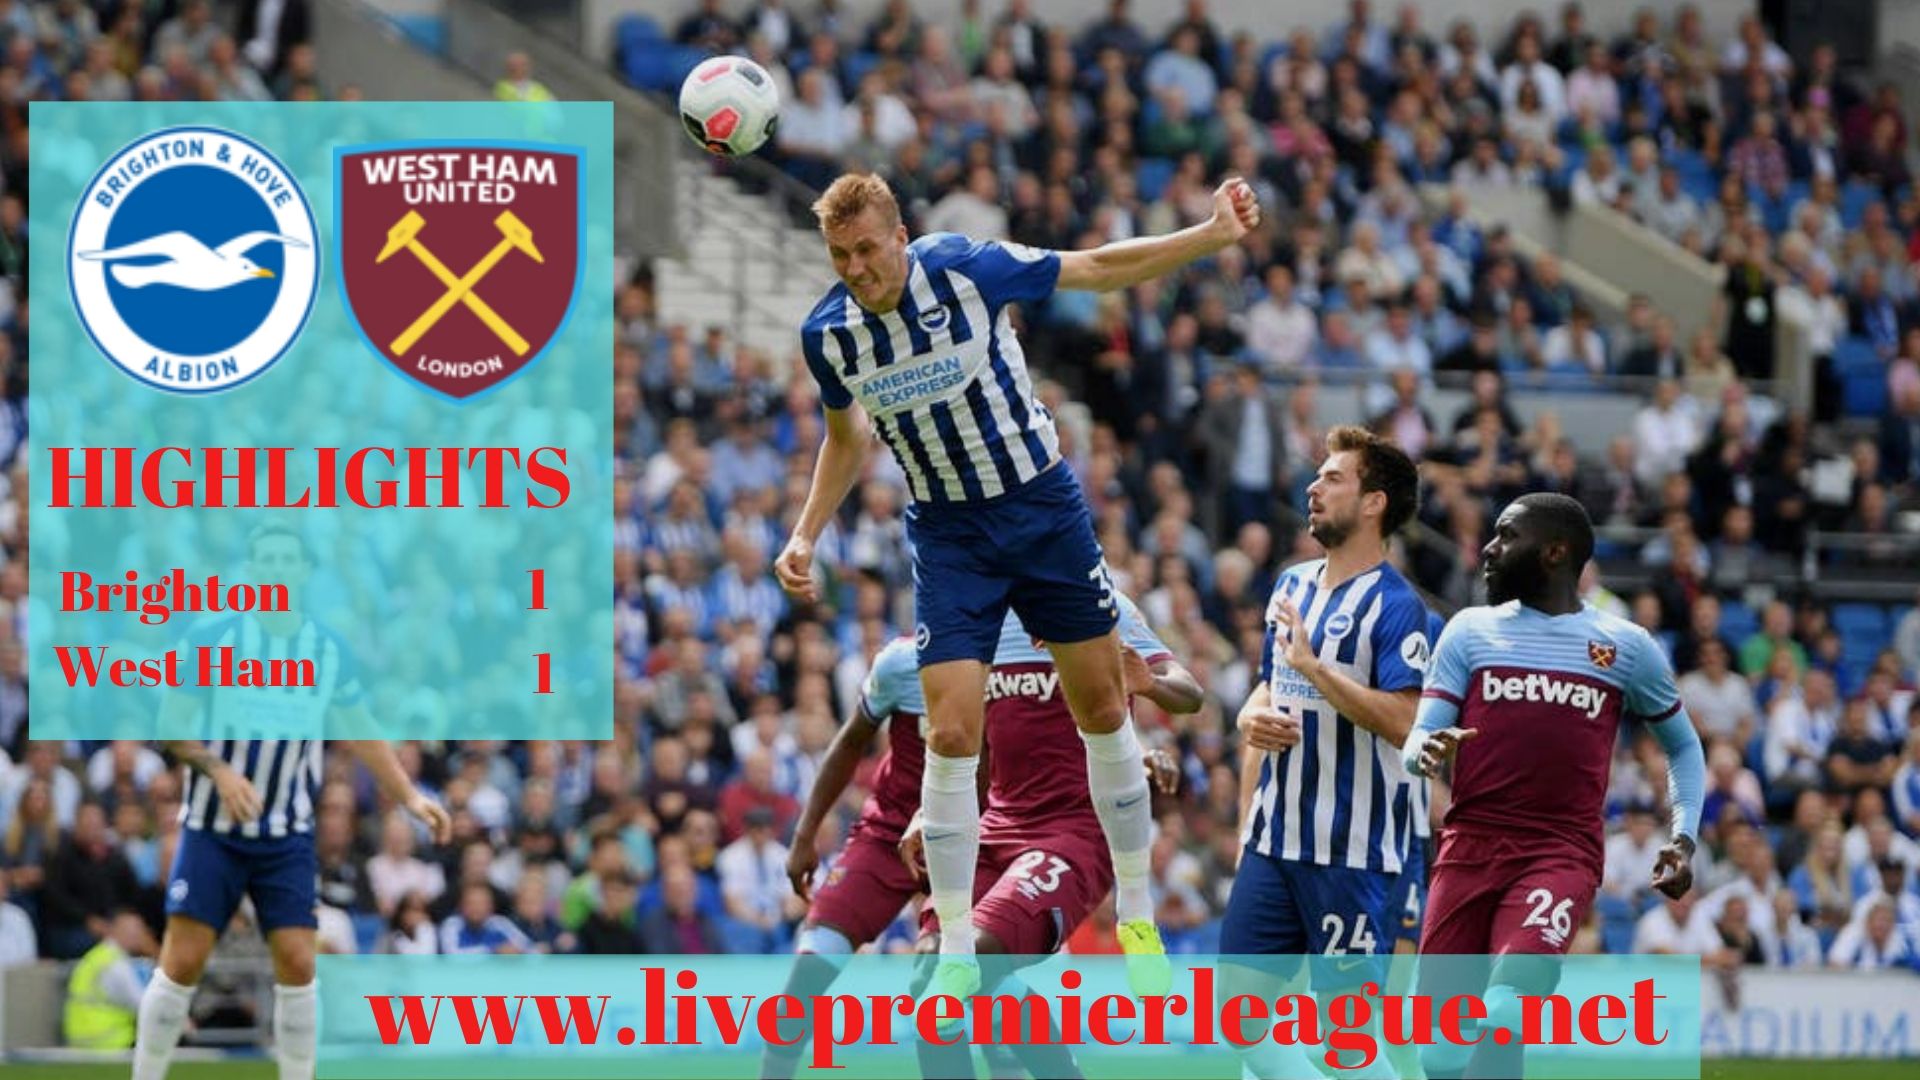 Brighton and Hove Albion Vs West Ham United Highlights 2019 | Premier